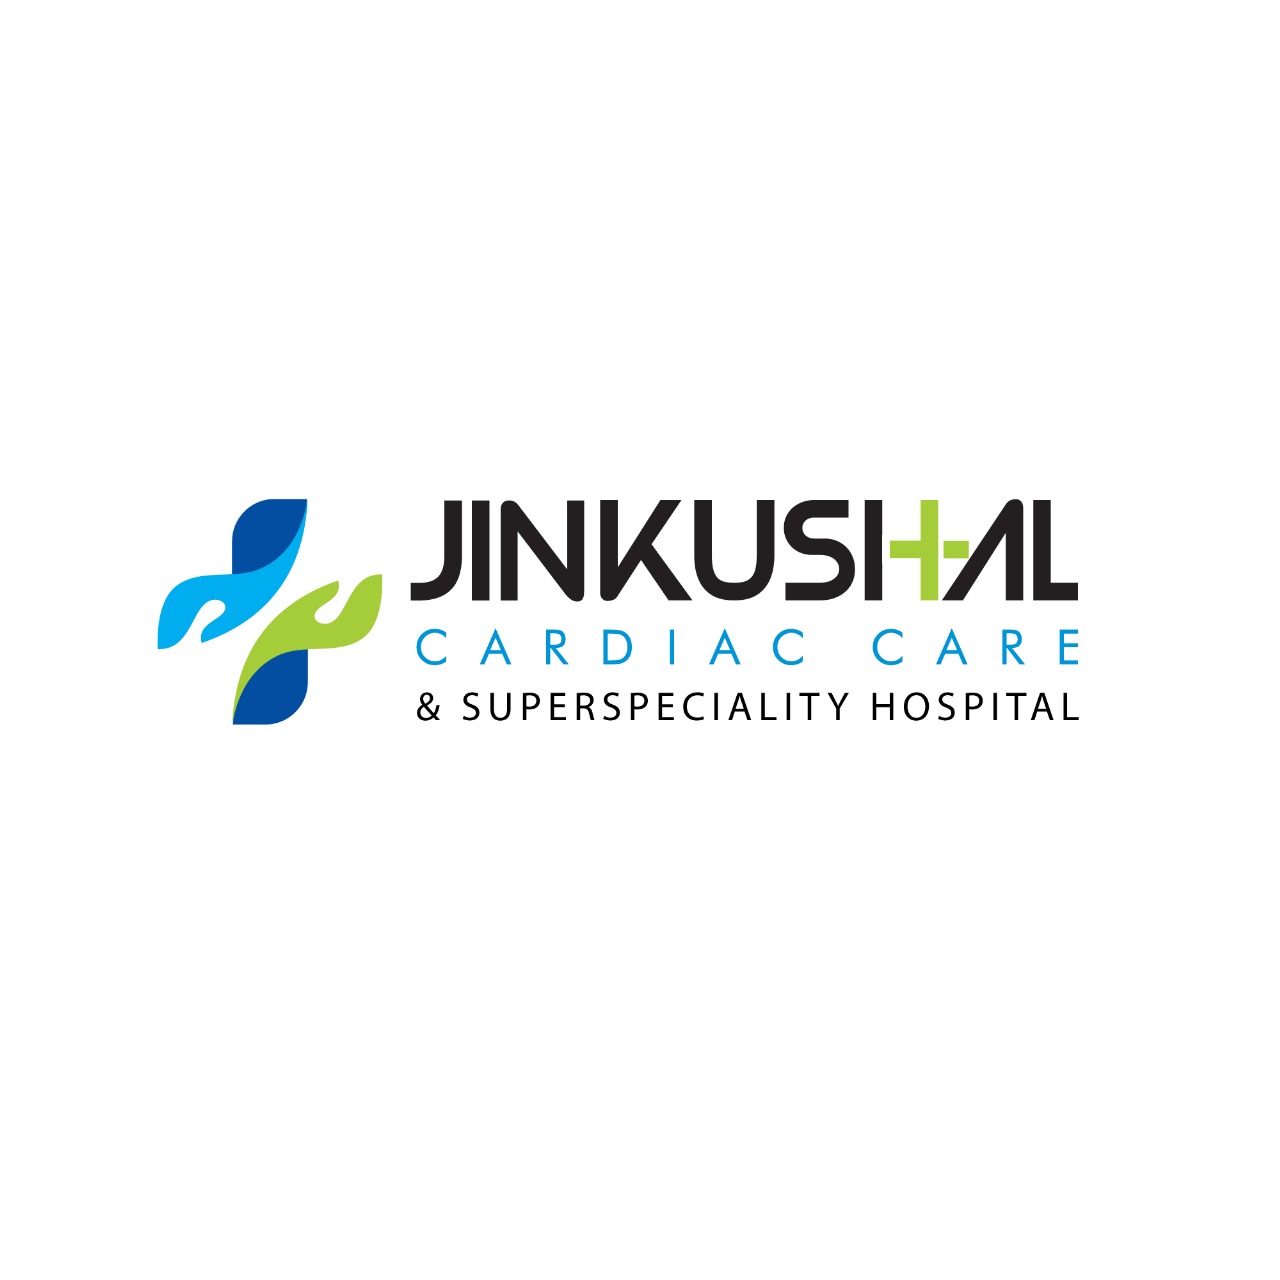 Jinkushal Cardiac Care & Superspeciality Hospital|Healthcare|Medical Services